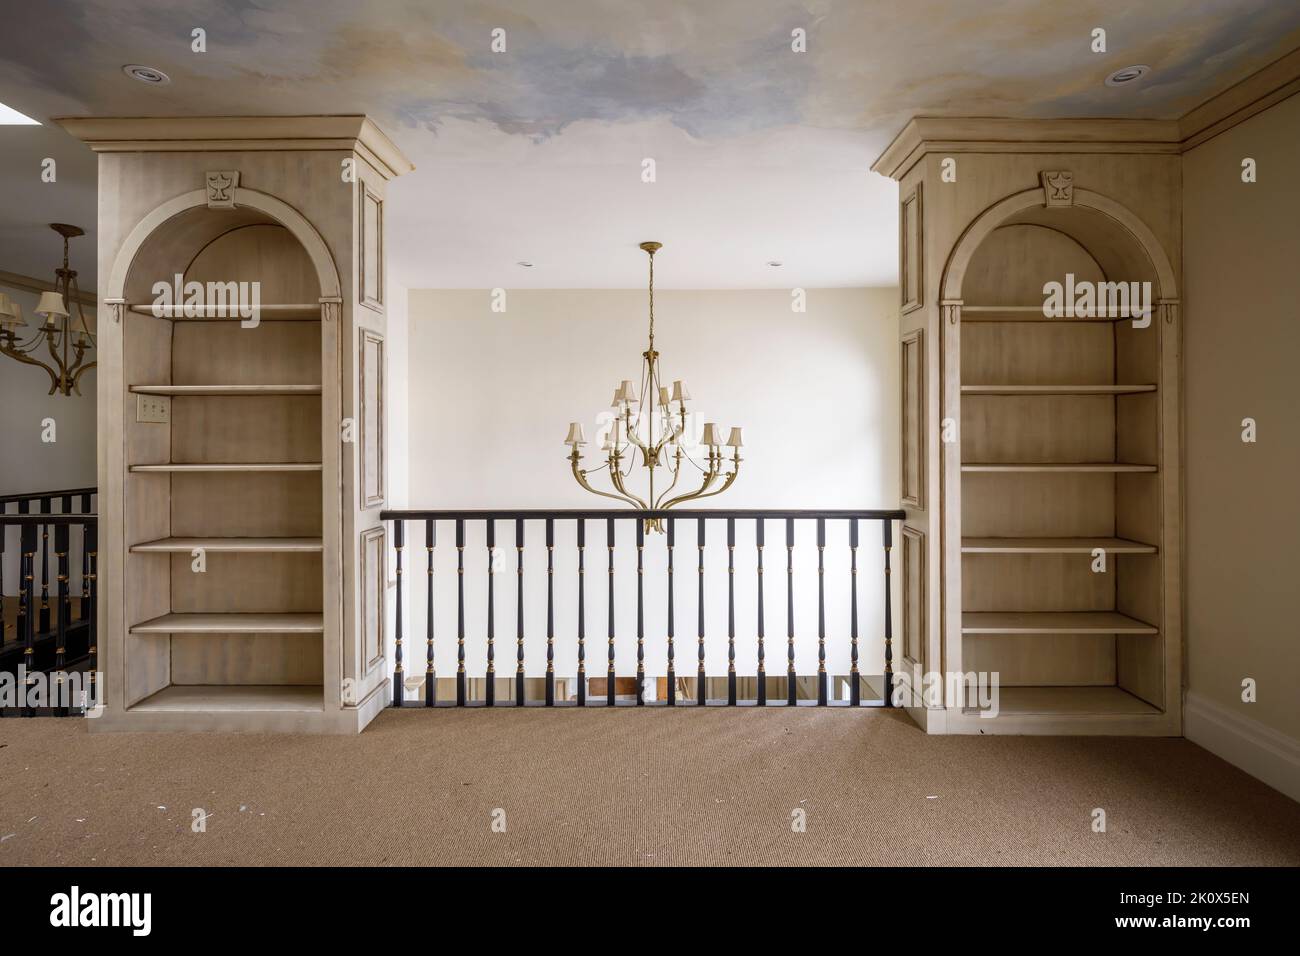 Built-in bookcases and a chandelier hanging from a vaulted ceiling. This home has since been demolished. Stock Photo